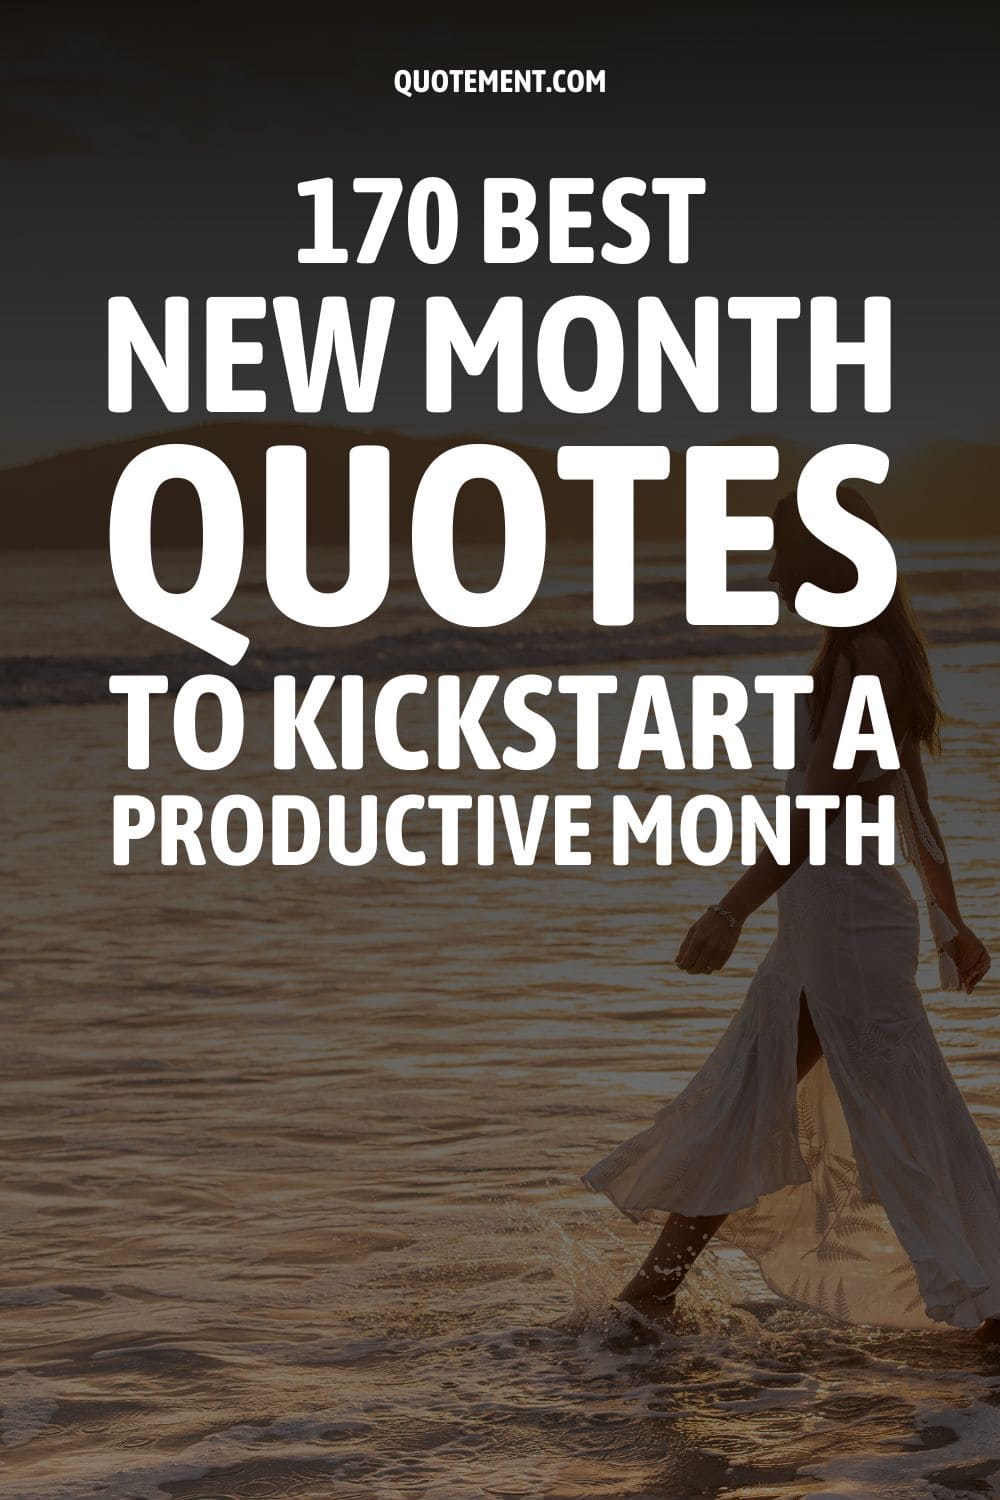 170 Best New Month Quotes to Kickstart A Productive Month 